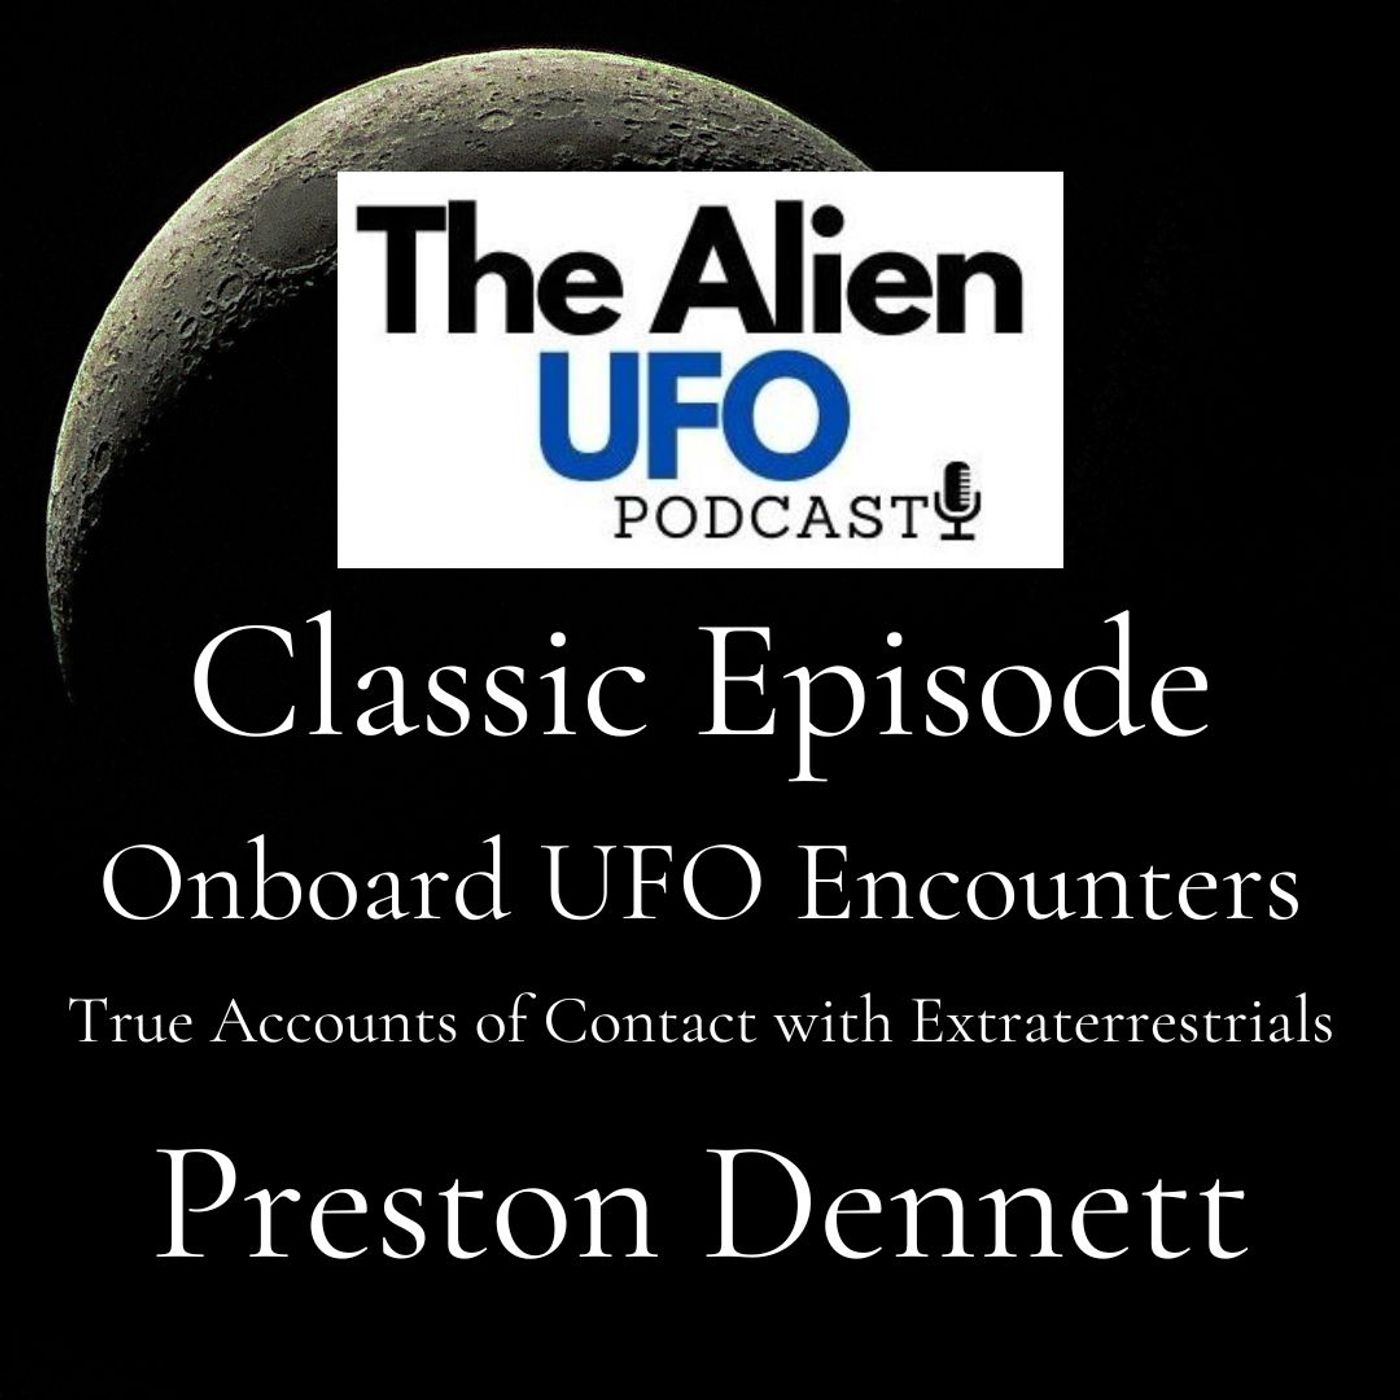 Classic Episode | Onboard UFO Encounters: True Accounts of Contact with Extraterrestrials